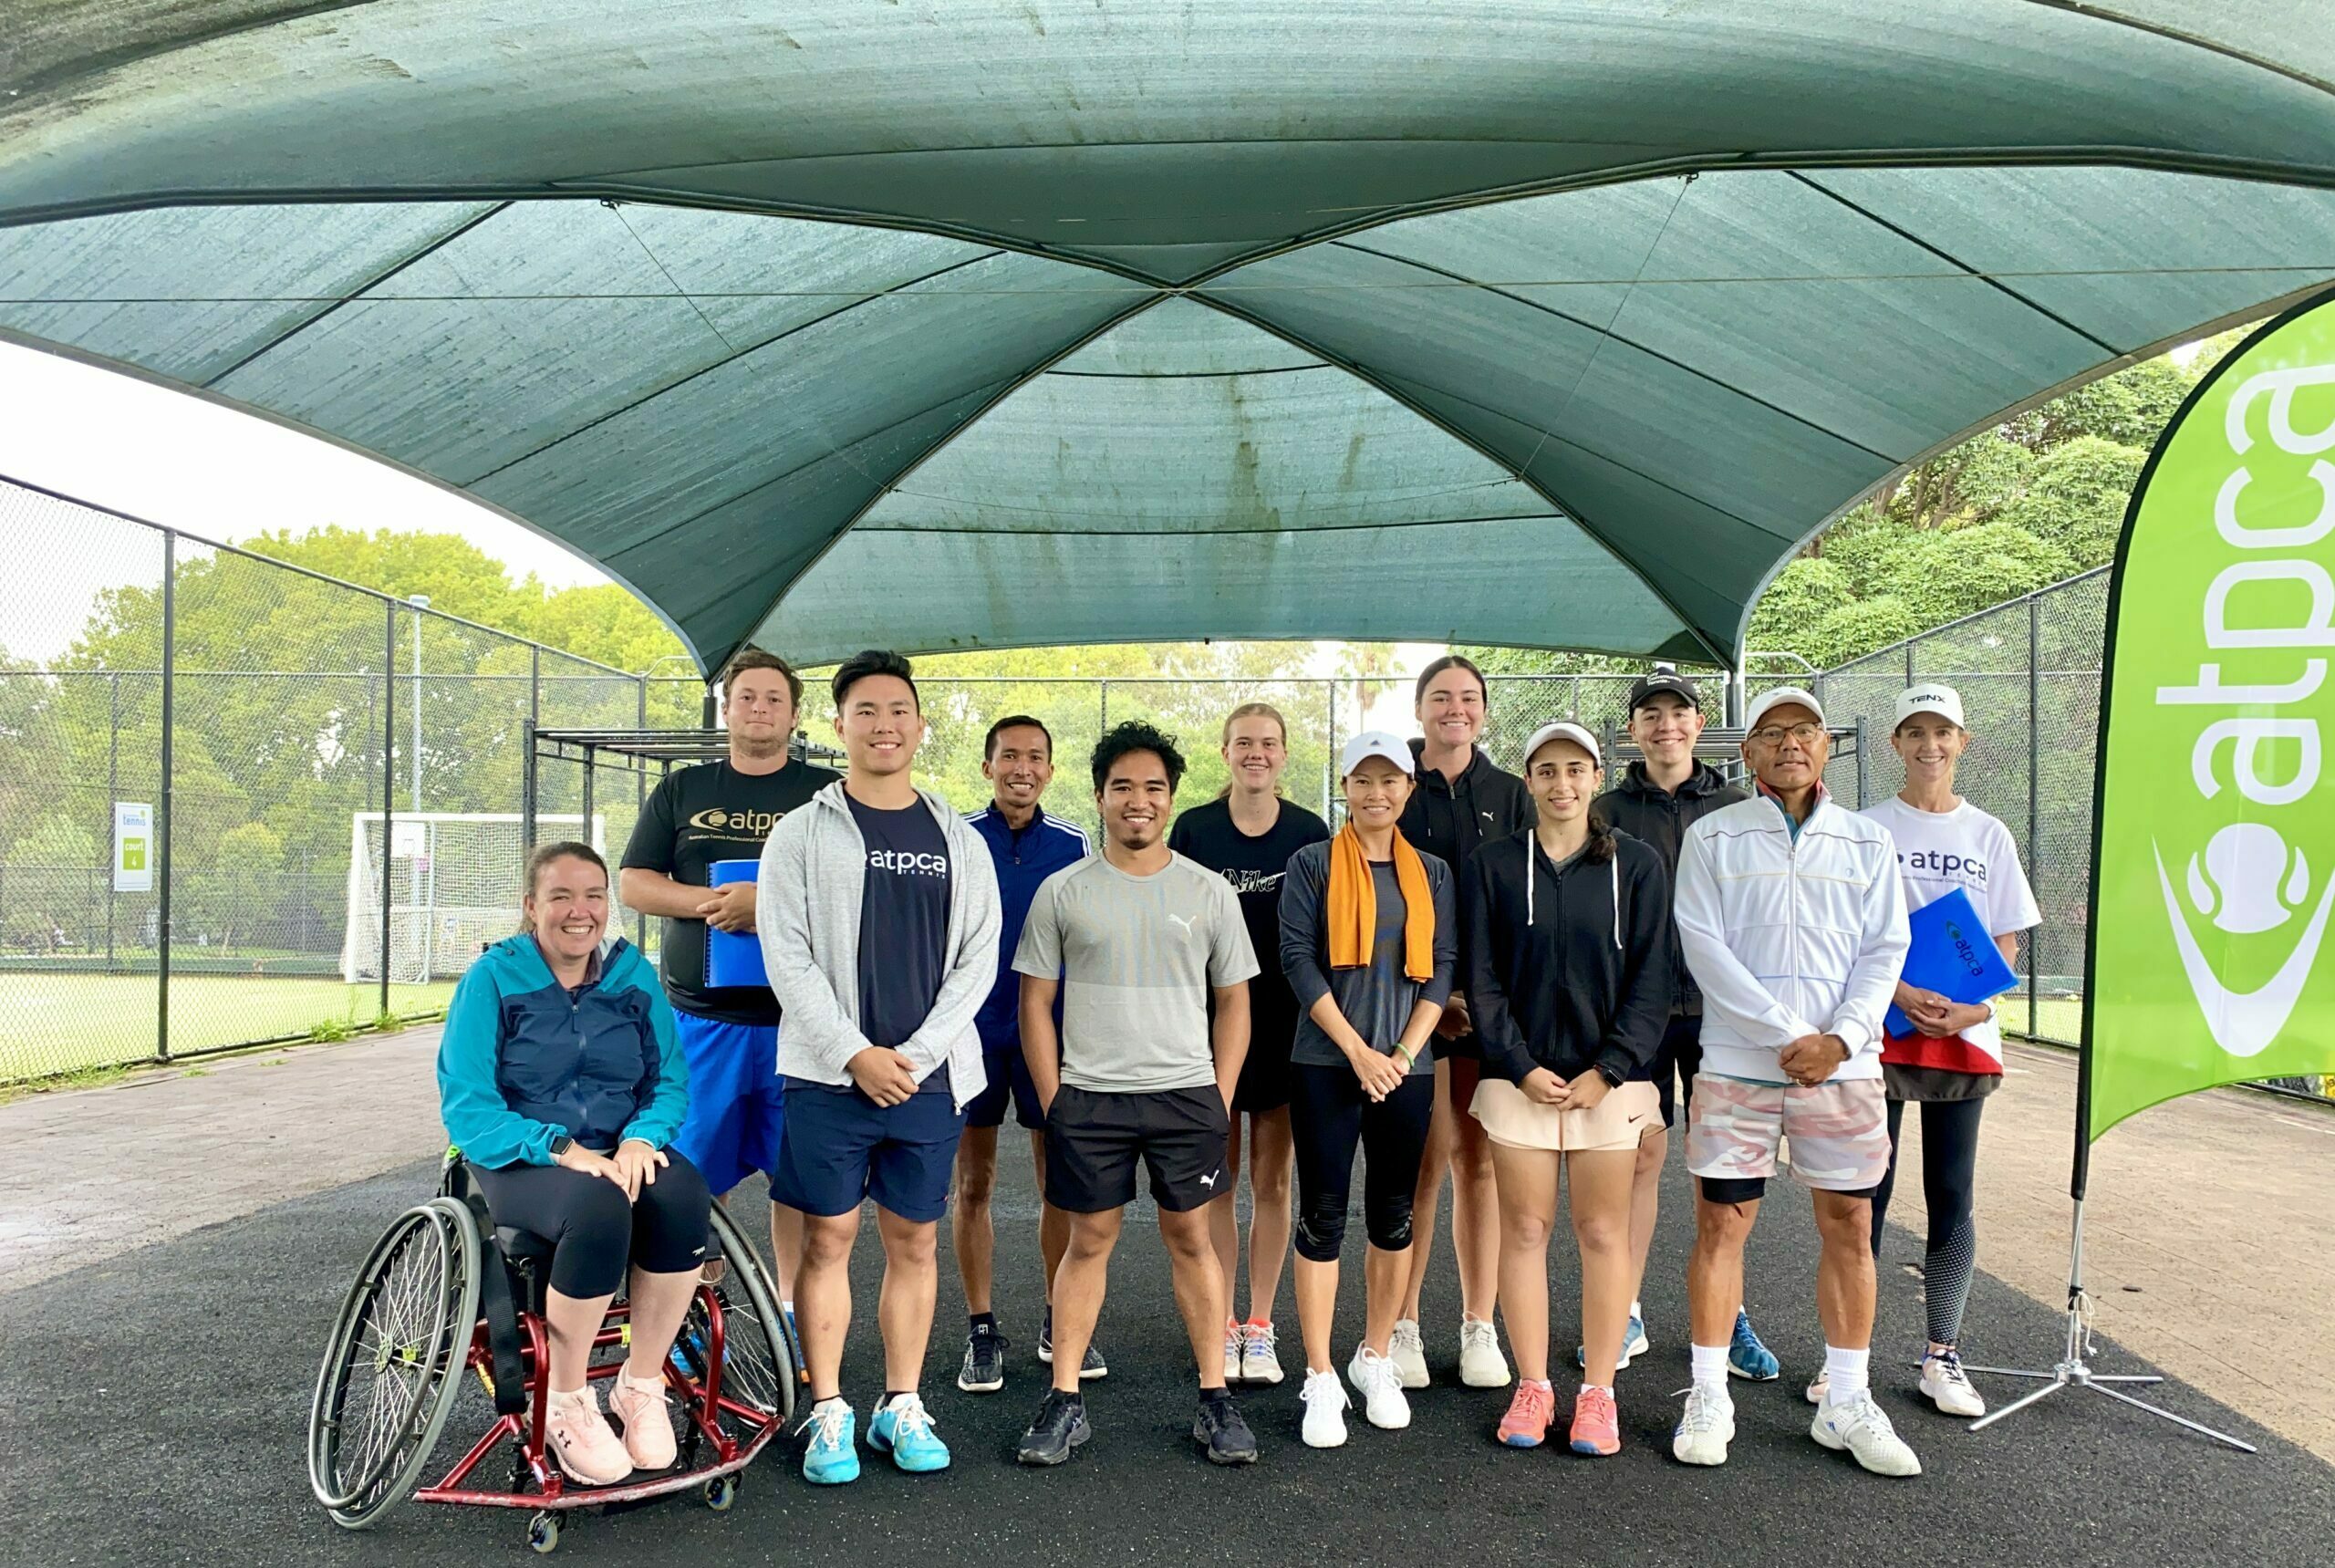 Australia Recognised Tennis Coaches on a tennis court in Sydney after having successfully completed their ATPCA tennis coach qualification course!